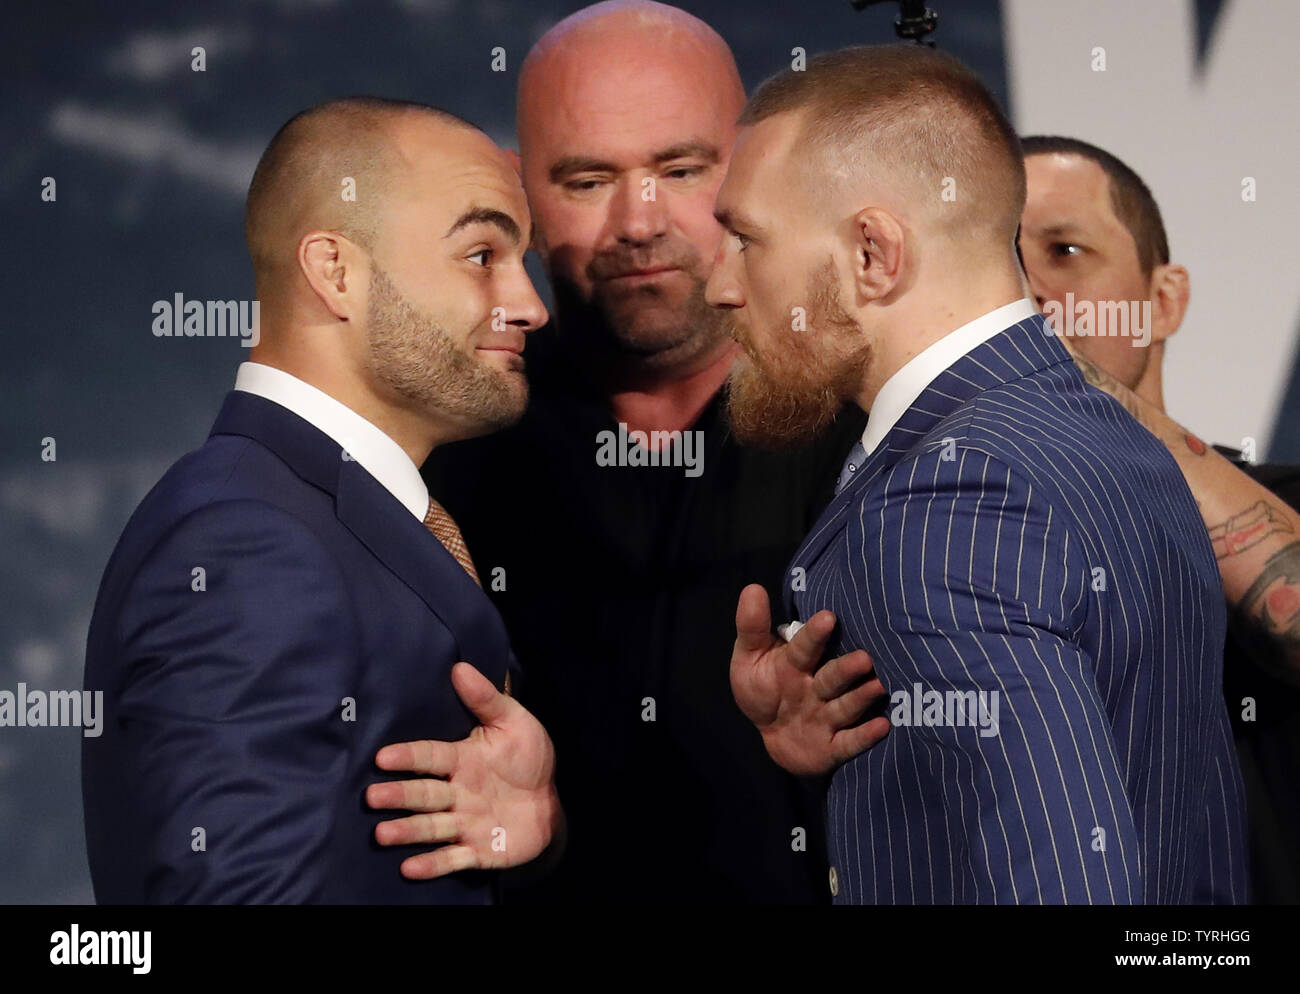 UFC president Dana White stands between UFC featherweight champion Conor  McGregor and UFC lightweight champion Eddie Alvarez when they face-off at  the UFC 205 press event at Madison Square Garden on September